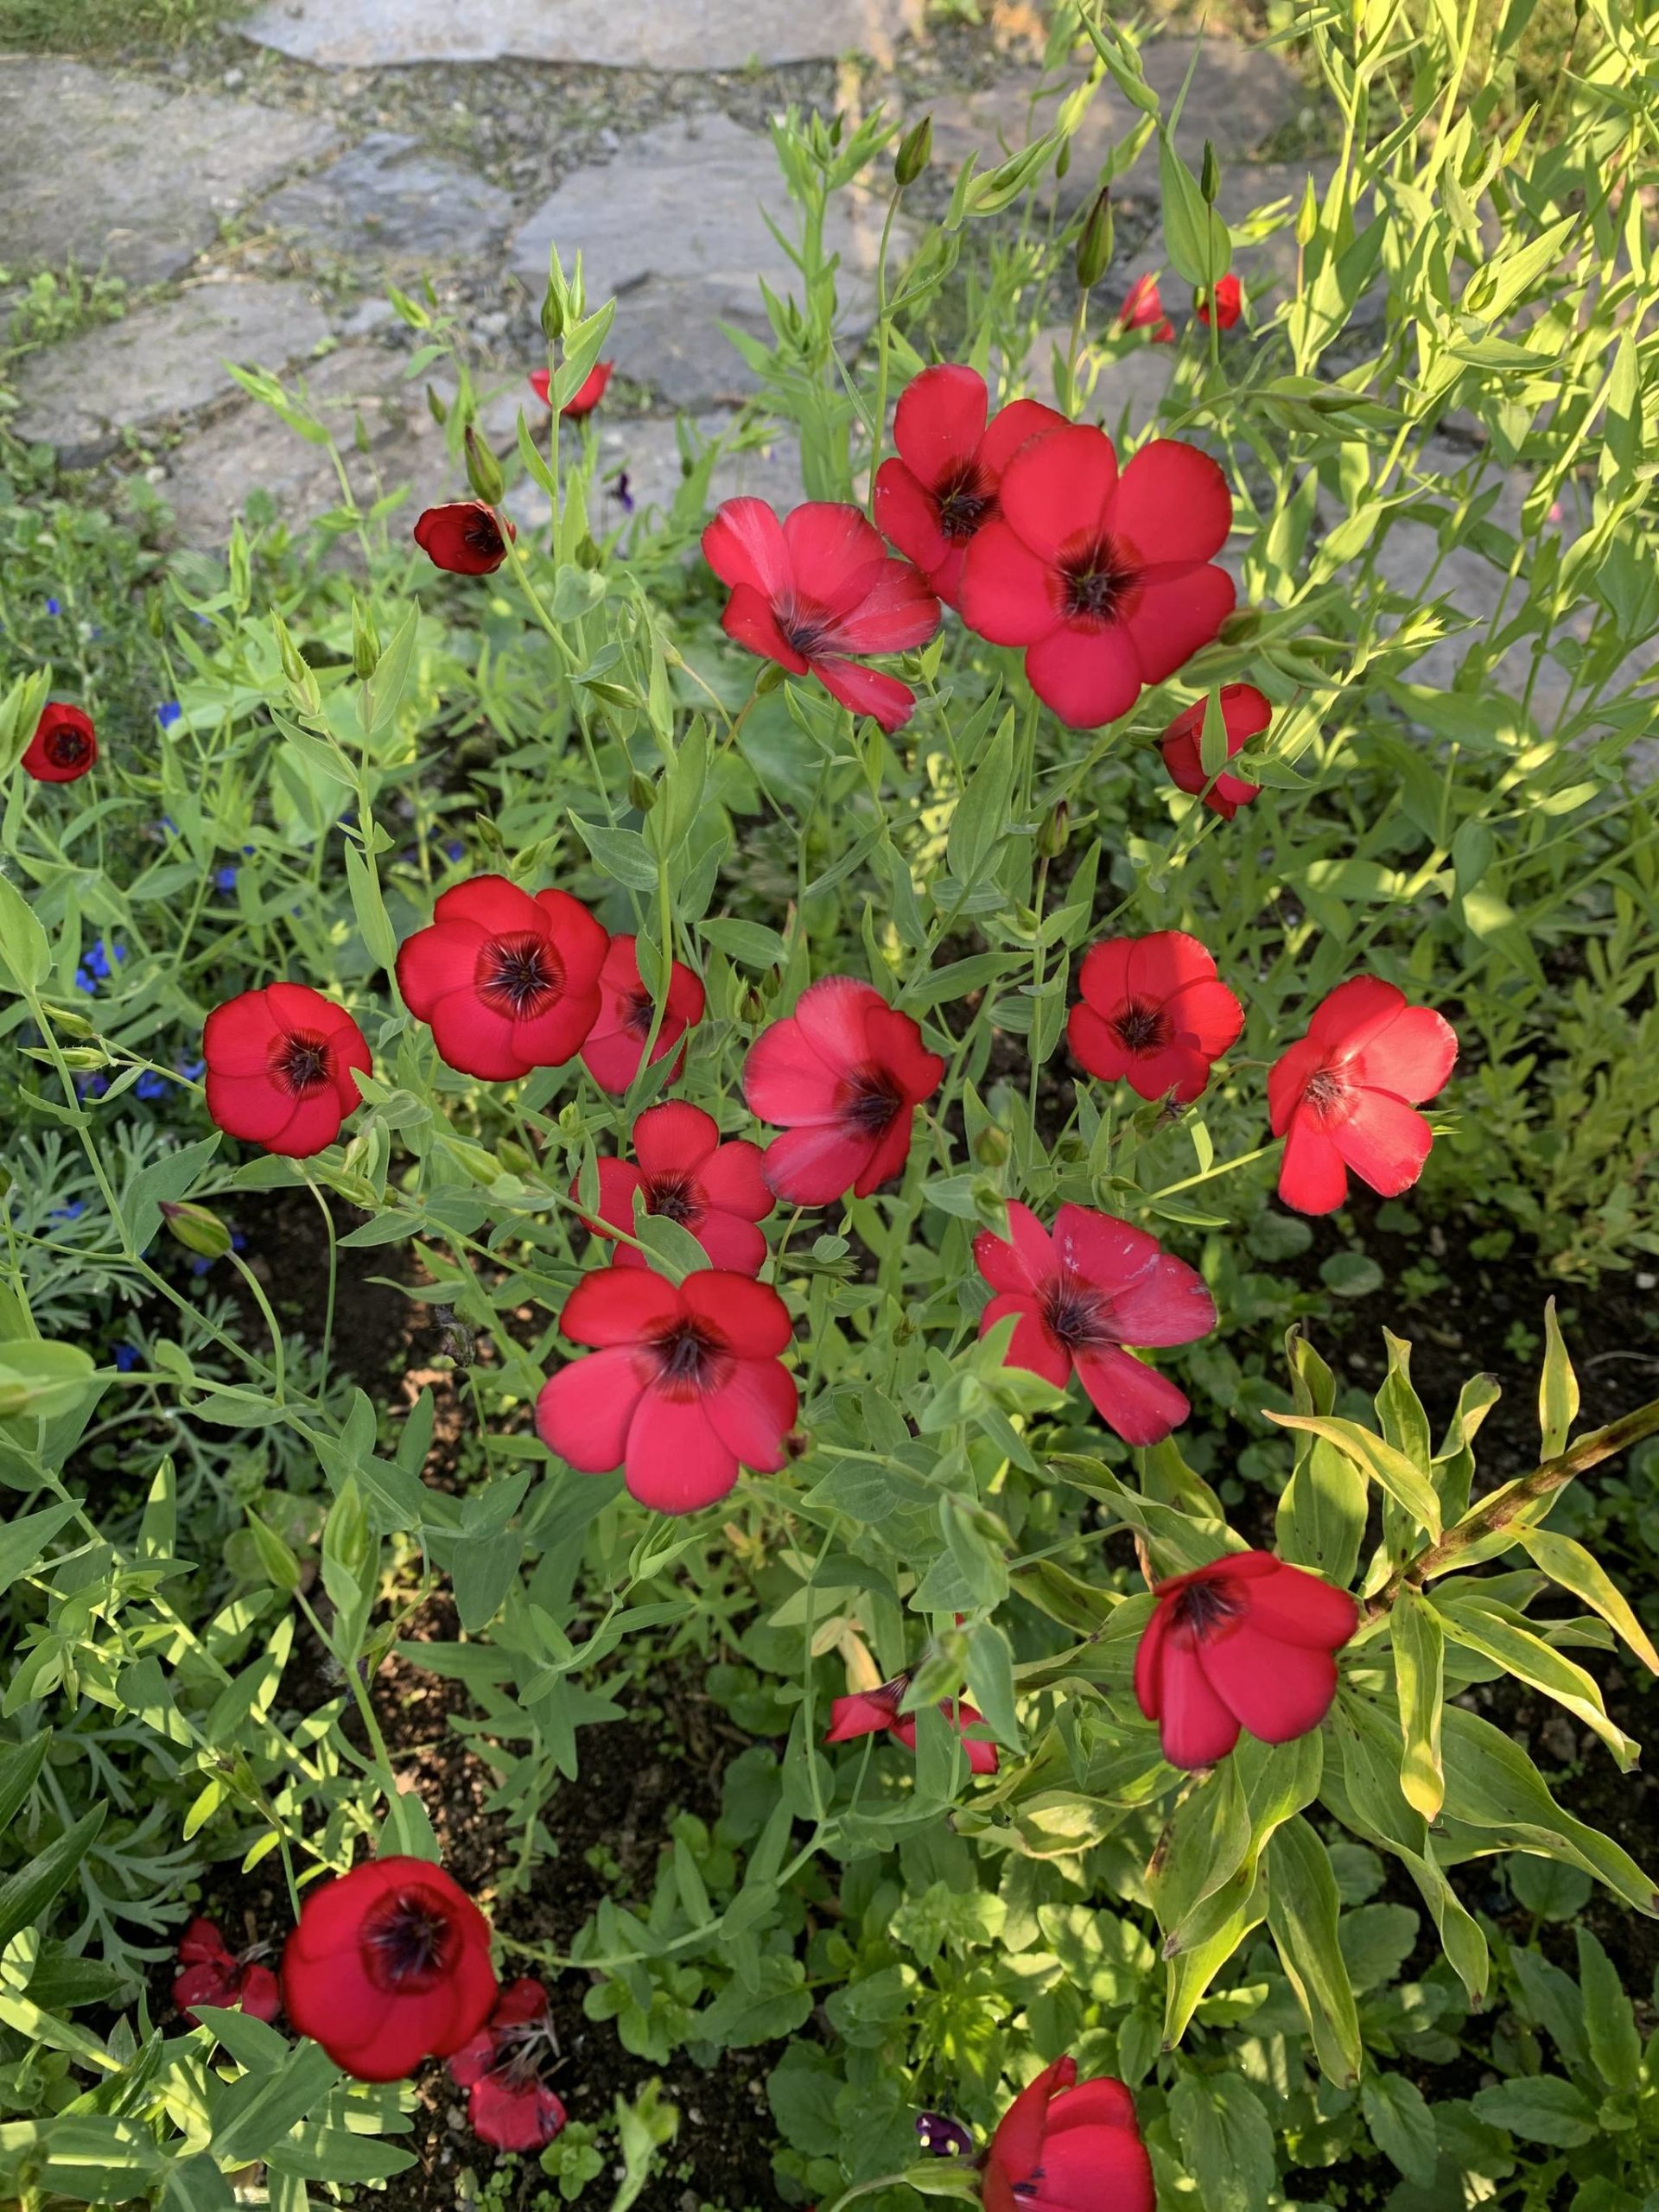 Linum rubrum is really just an annual red flax, but the bloom is satiny and edged with black and not to be resisted. (Photo by Rosemary Fitzpatrick)